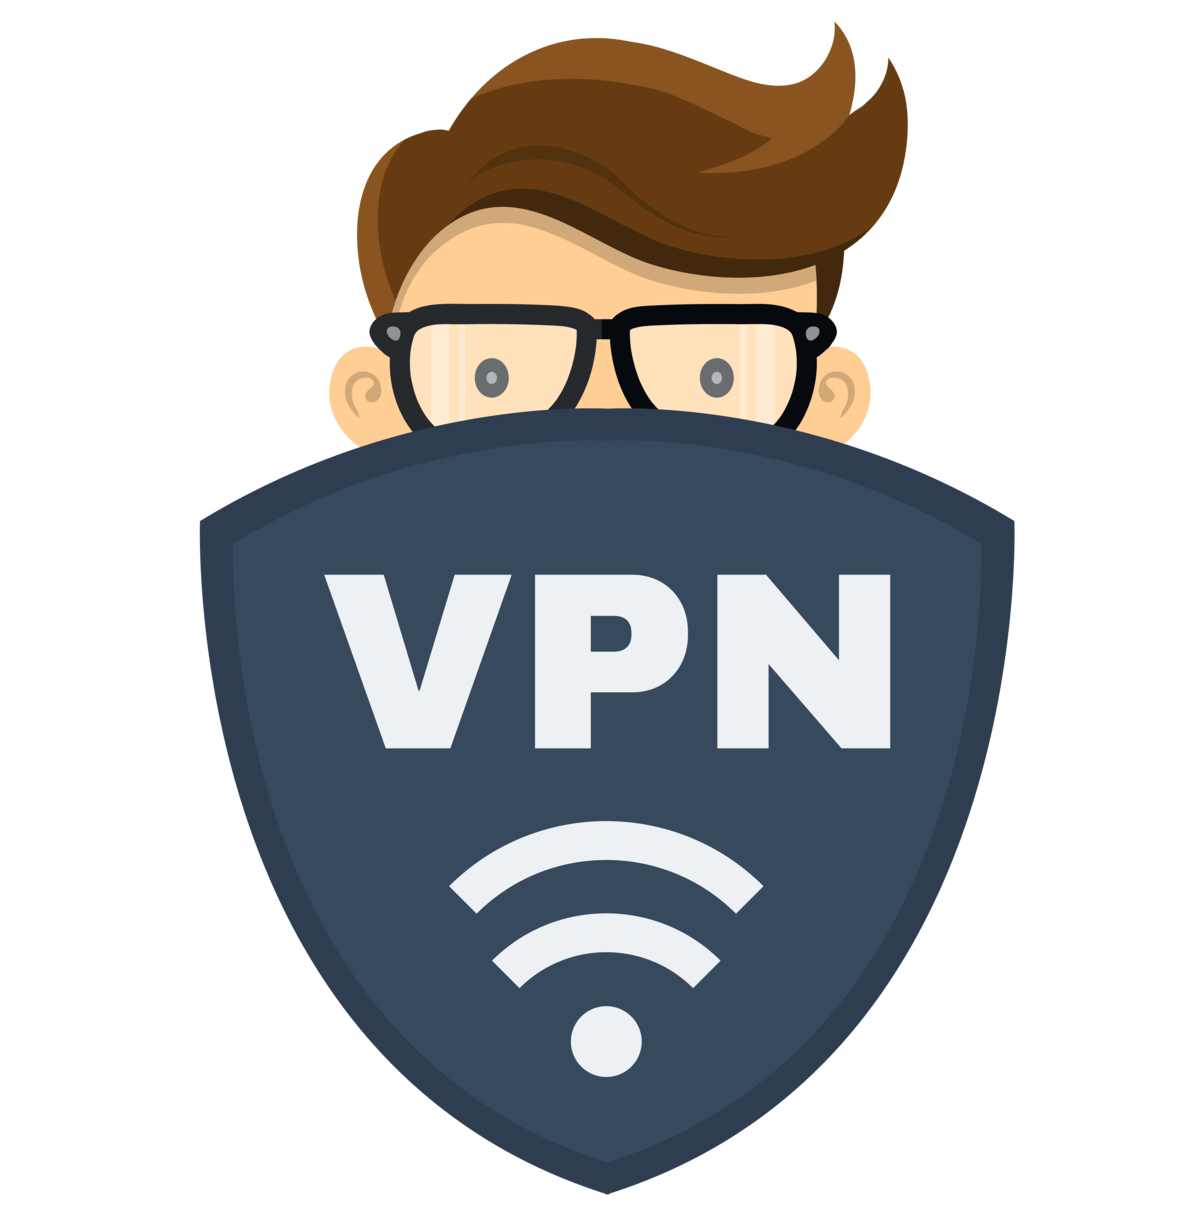 How to install PPTP VPN server in RHEL/Centos 6.4 Linux